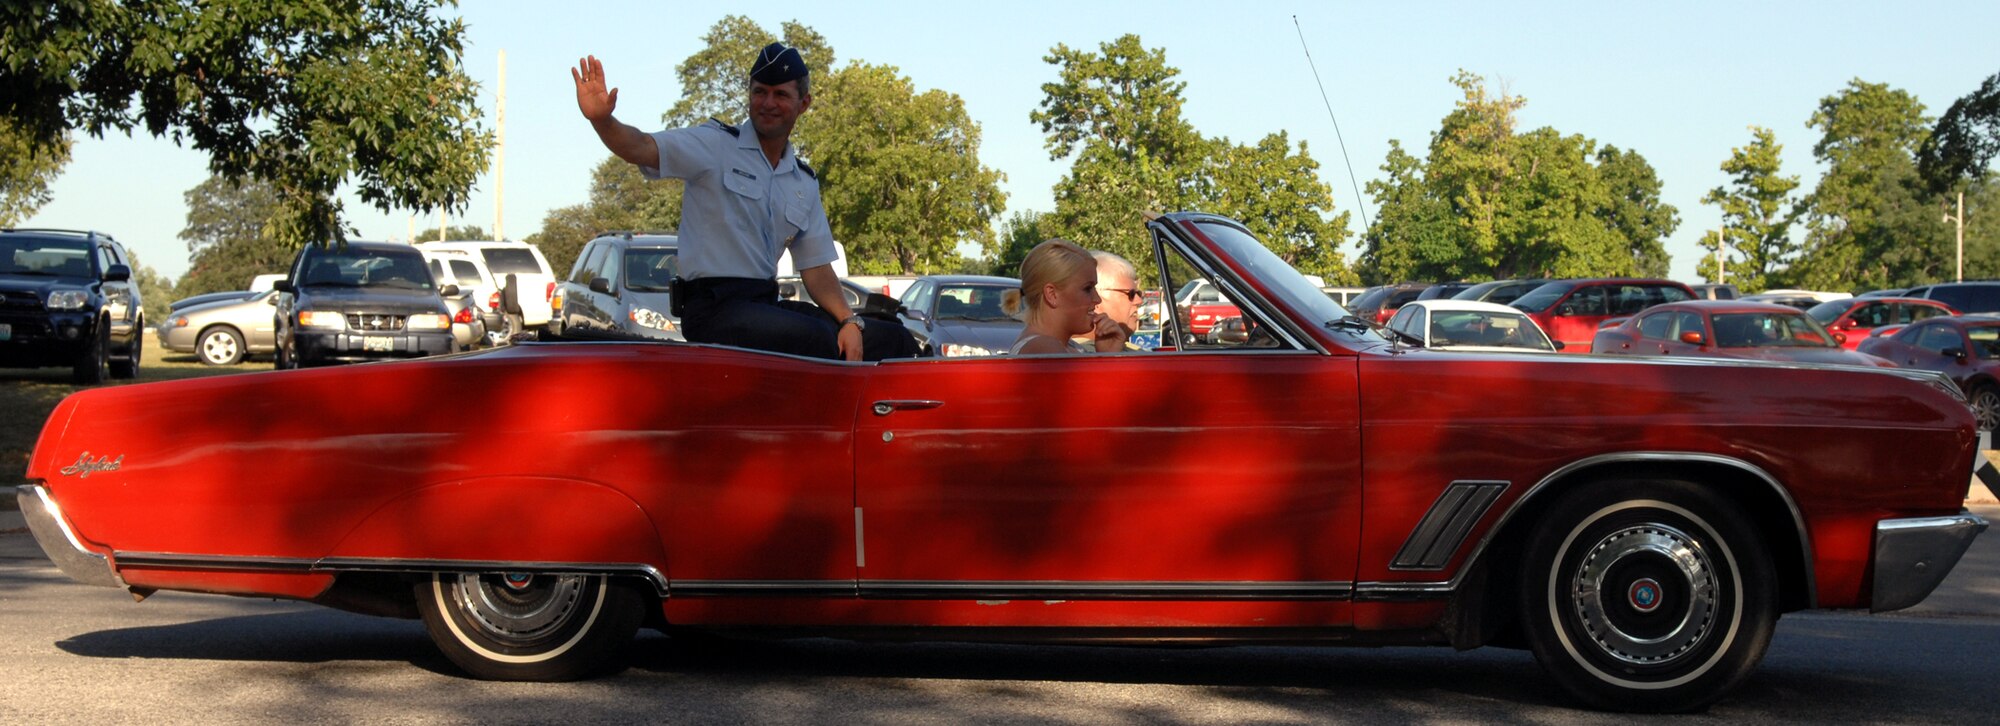 SEDALIA, Mo. - Brig. Gen. Greg Biscone, 509th Bomb Wing commander, rides in a Buick Skylark during a parade at the first day of the 2007 Missouri State Fair Aug. 9. The 2007 Missouri State Fair runs until Aug. 19 at the state fair grounds in Sedalia. (U.S. Air Force photo/Airman 1st Class Stephen Linch)